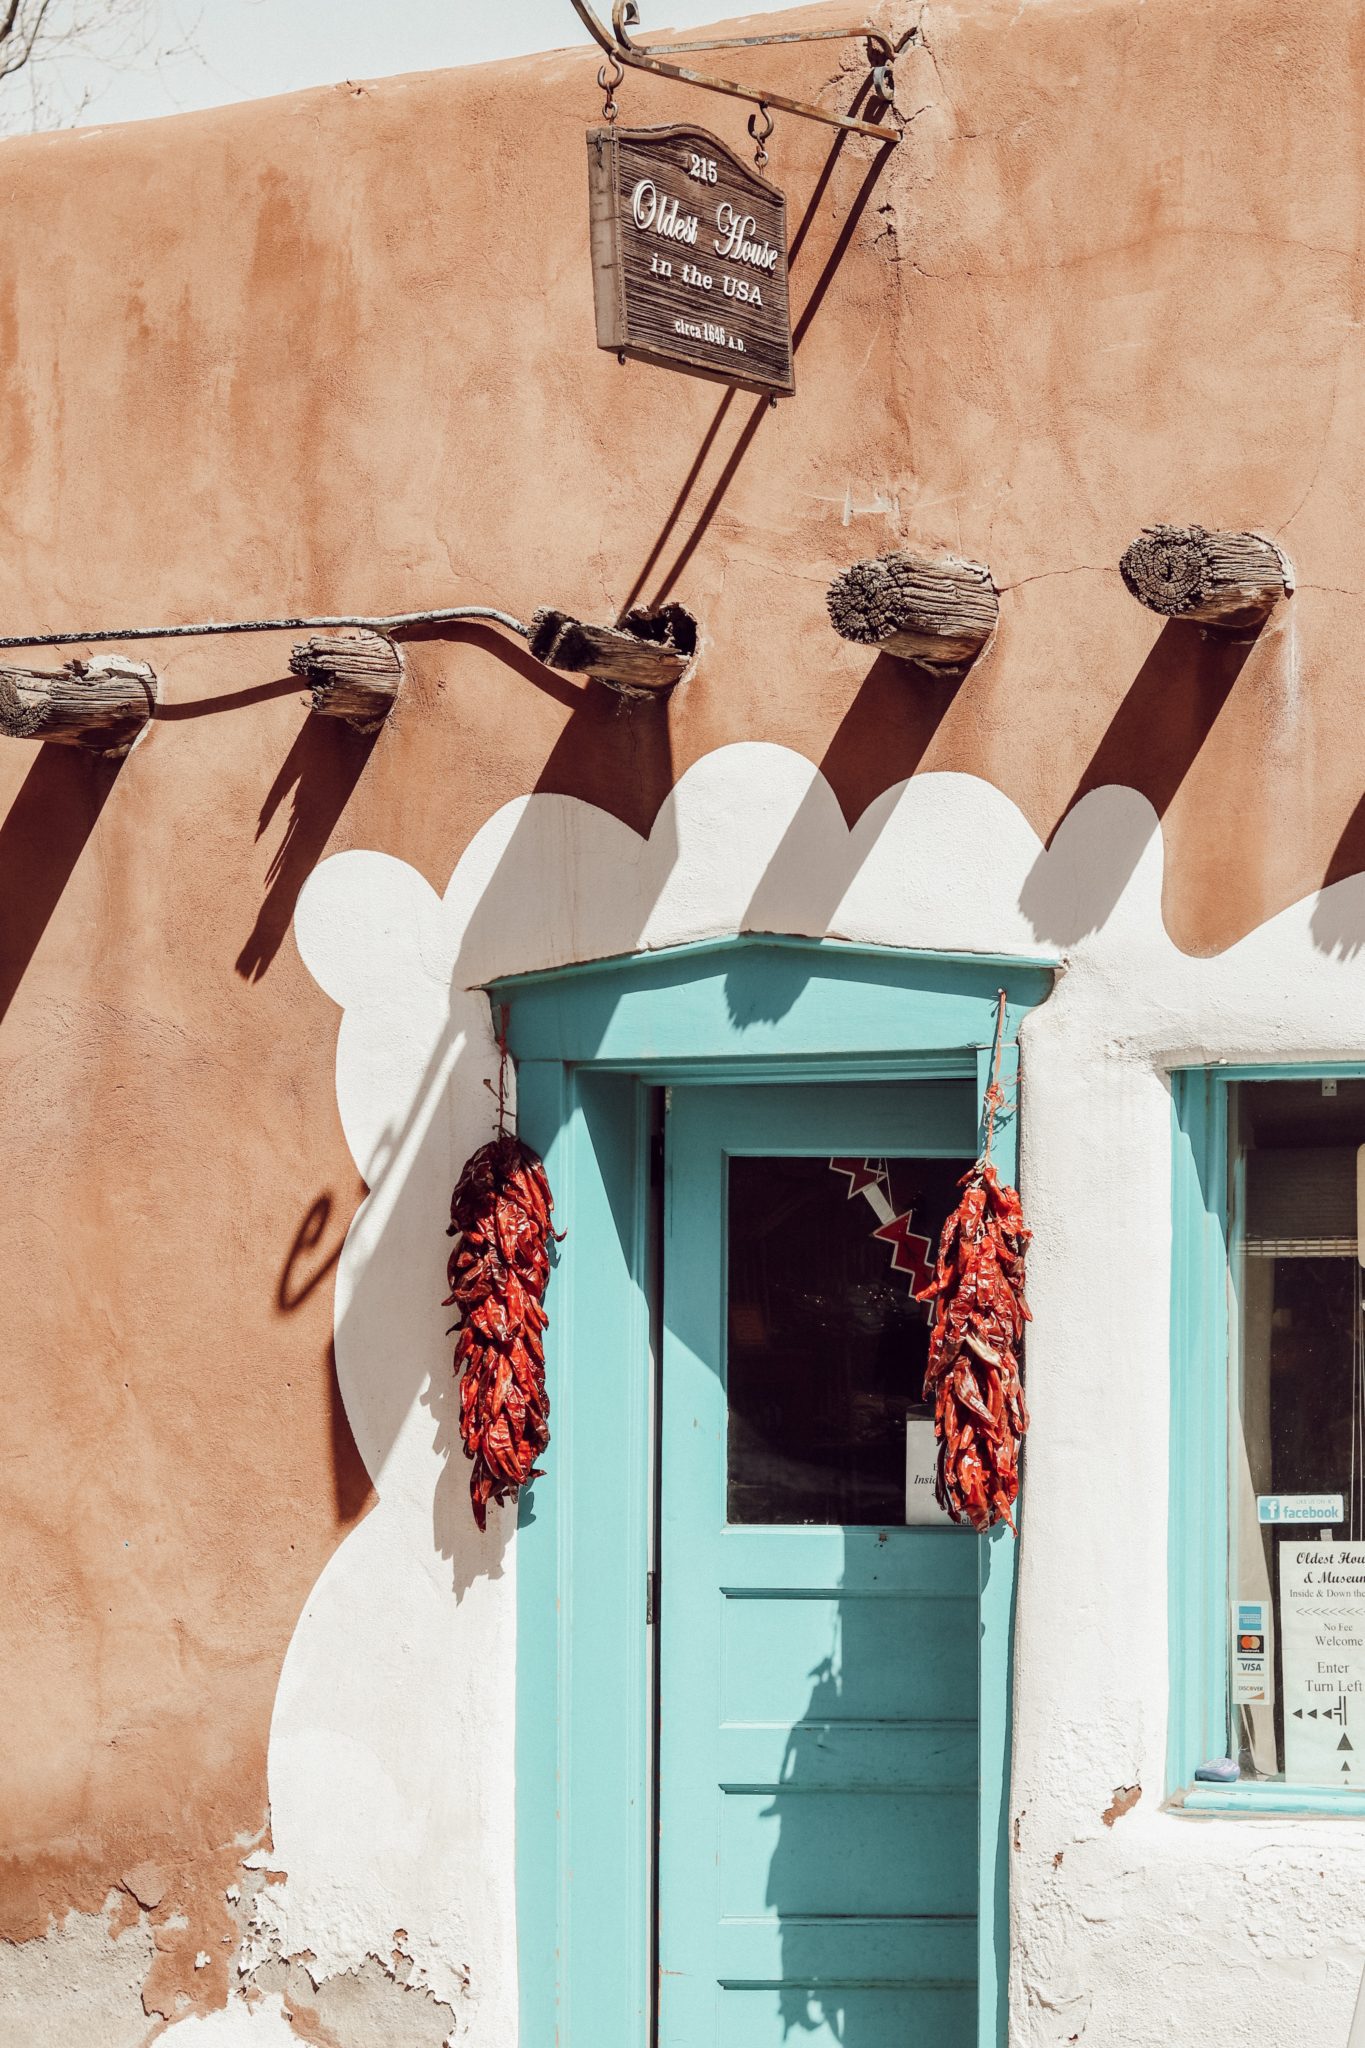 First Time Guide to Old Town Santa Fe - Simply Wander